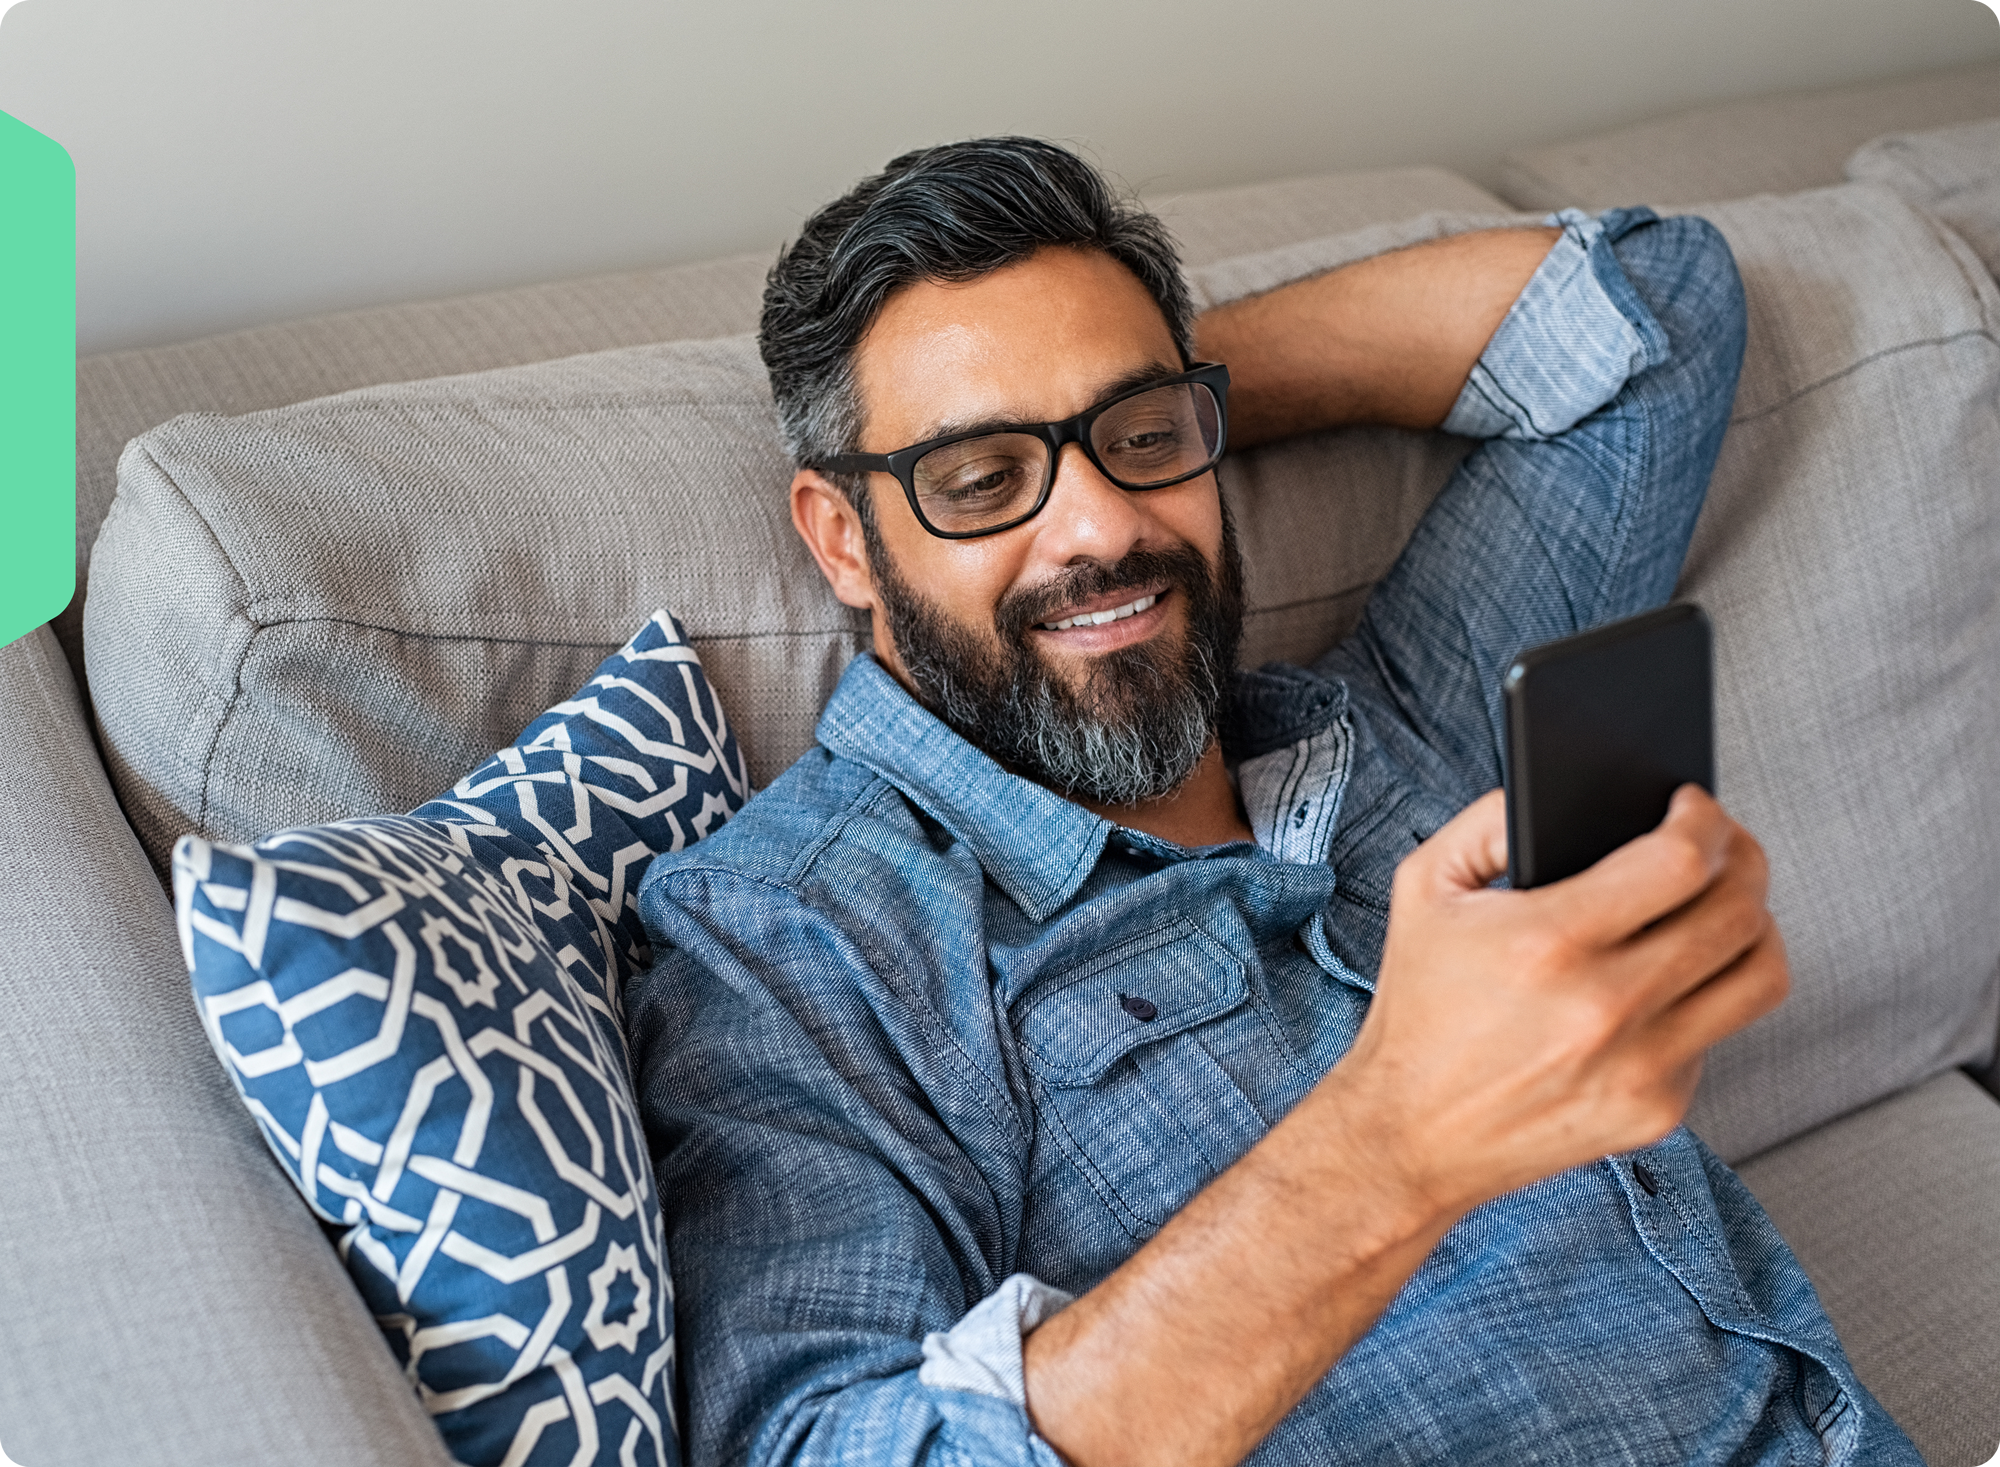 A man, smiling, browsing Wholescripts.com on his phone from his couch